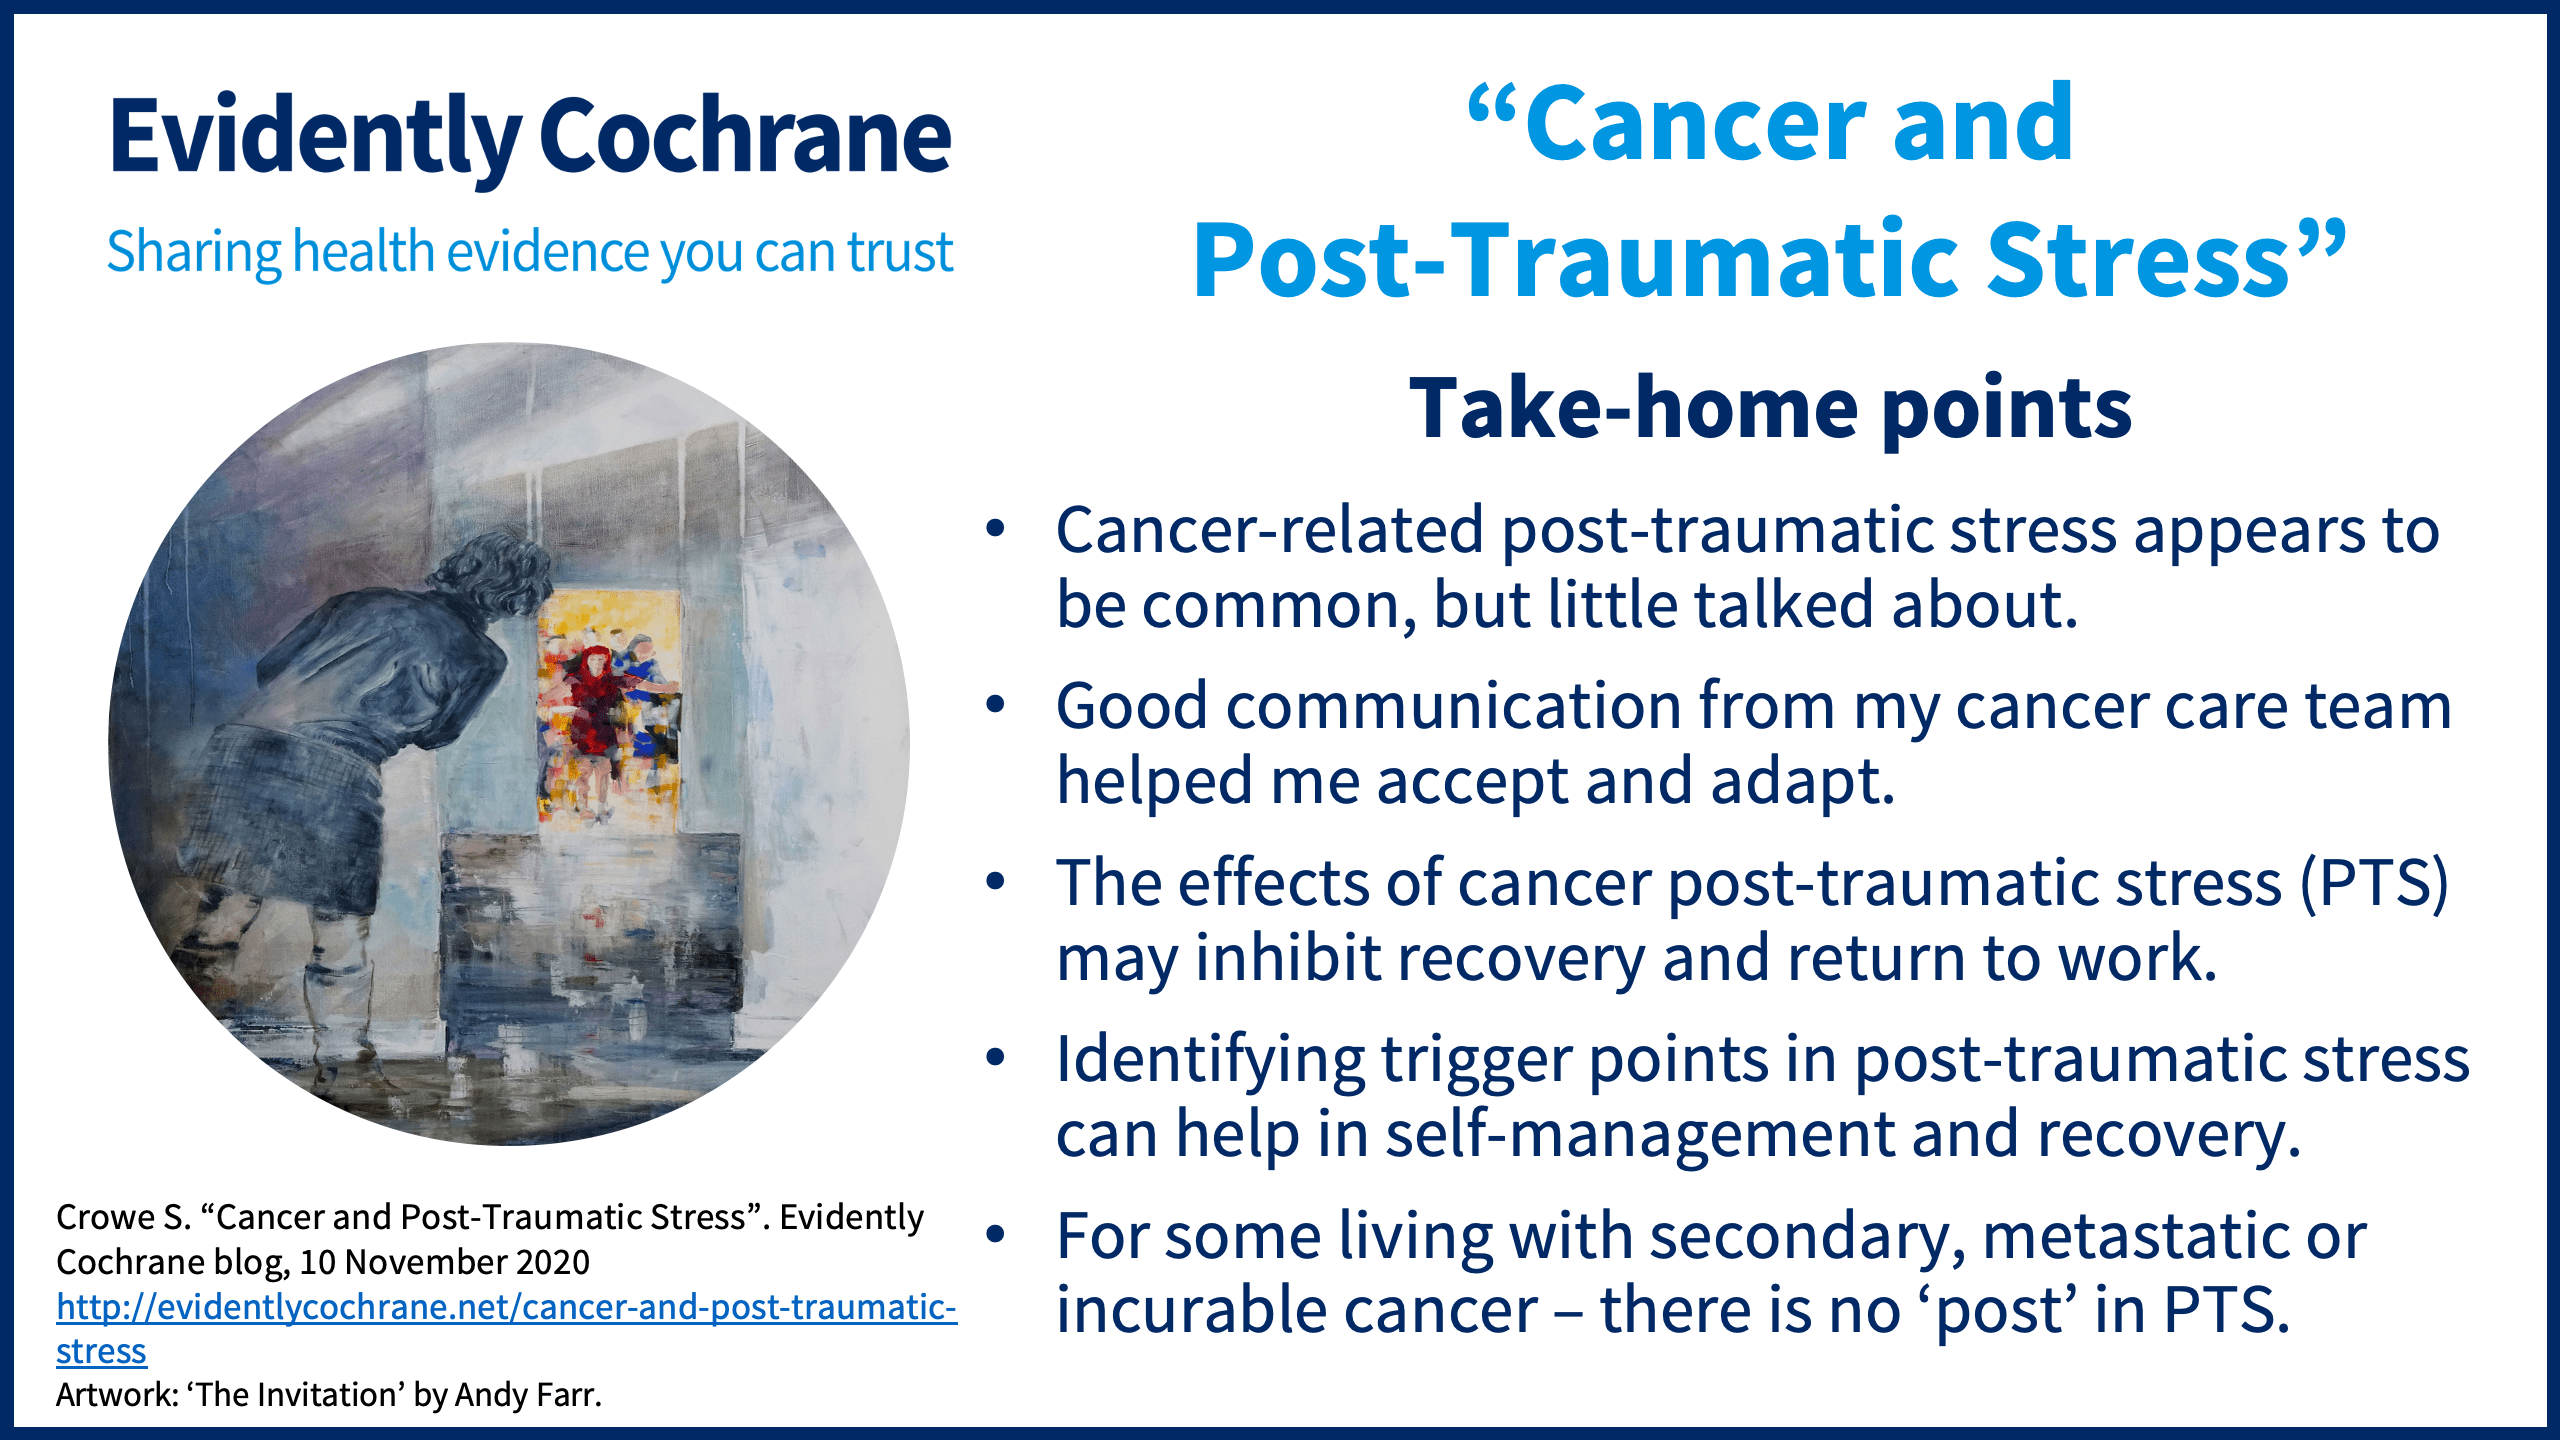 Cancer-related post-traumatic stress appears to be common, but little talked about. Good communication from my cancer care team helped me accept and adapt. The effects of cancer post-traumatic stress (PTS) may inhibit recovery and return to work. Identifying trigger points in post-traumatic stress can help in self-management and recovery. For some living with secondary, metastatic or incurable cancer – there is no ‘post’ in PTS.